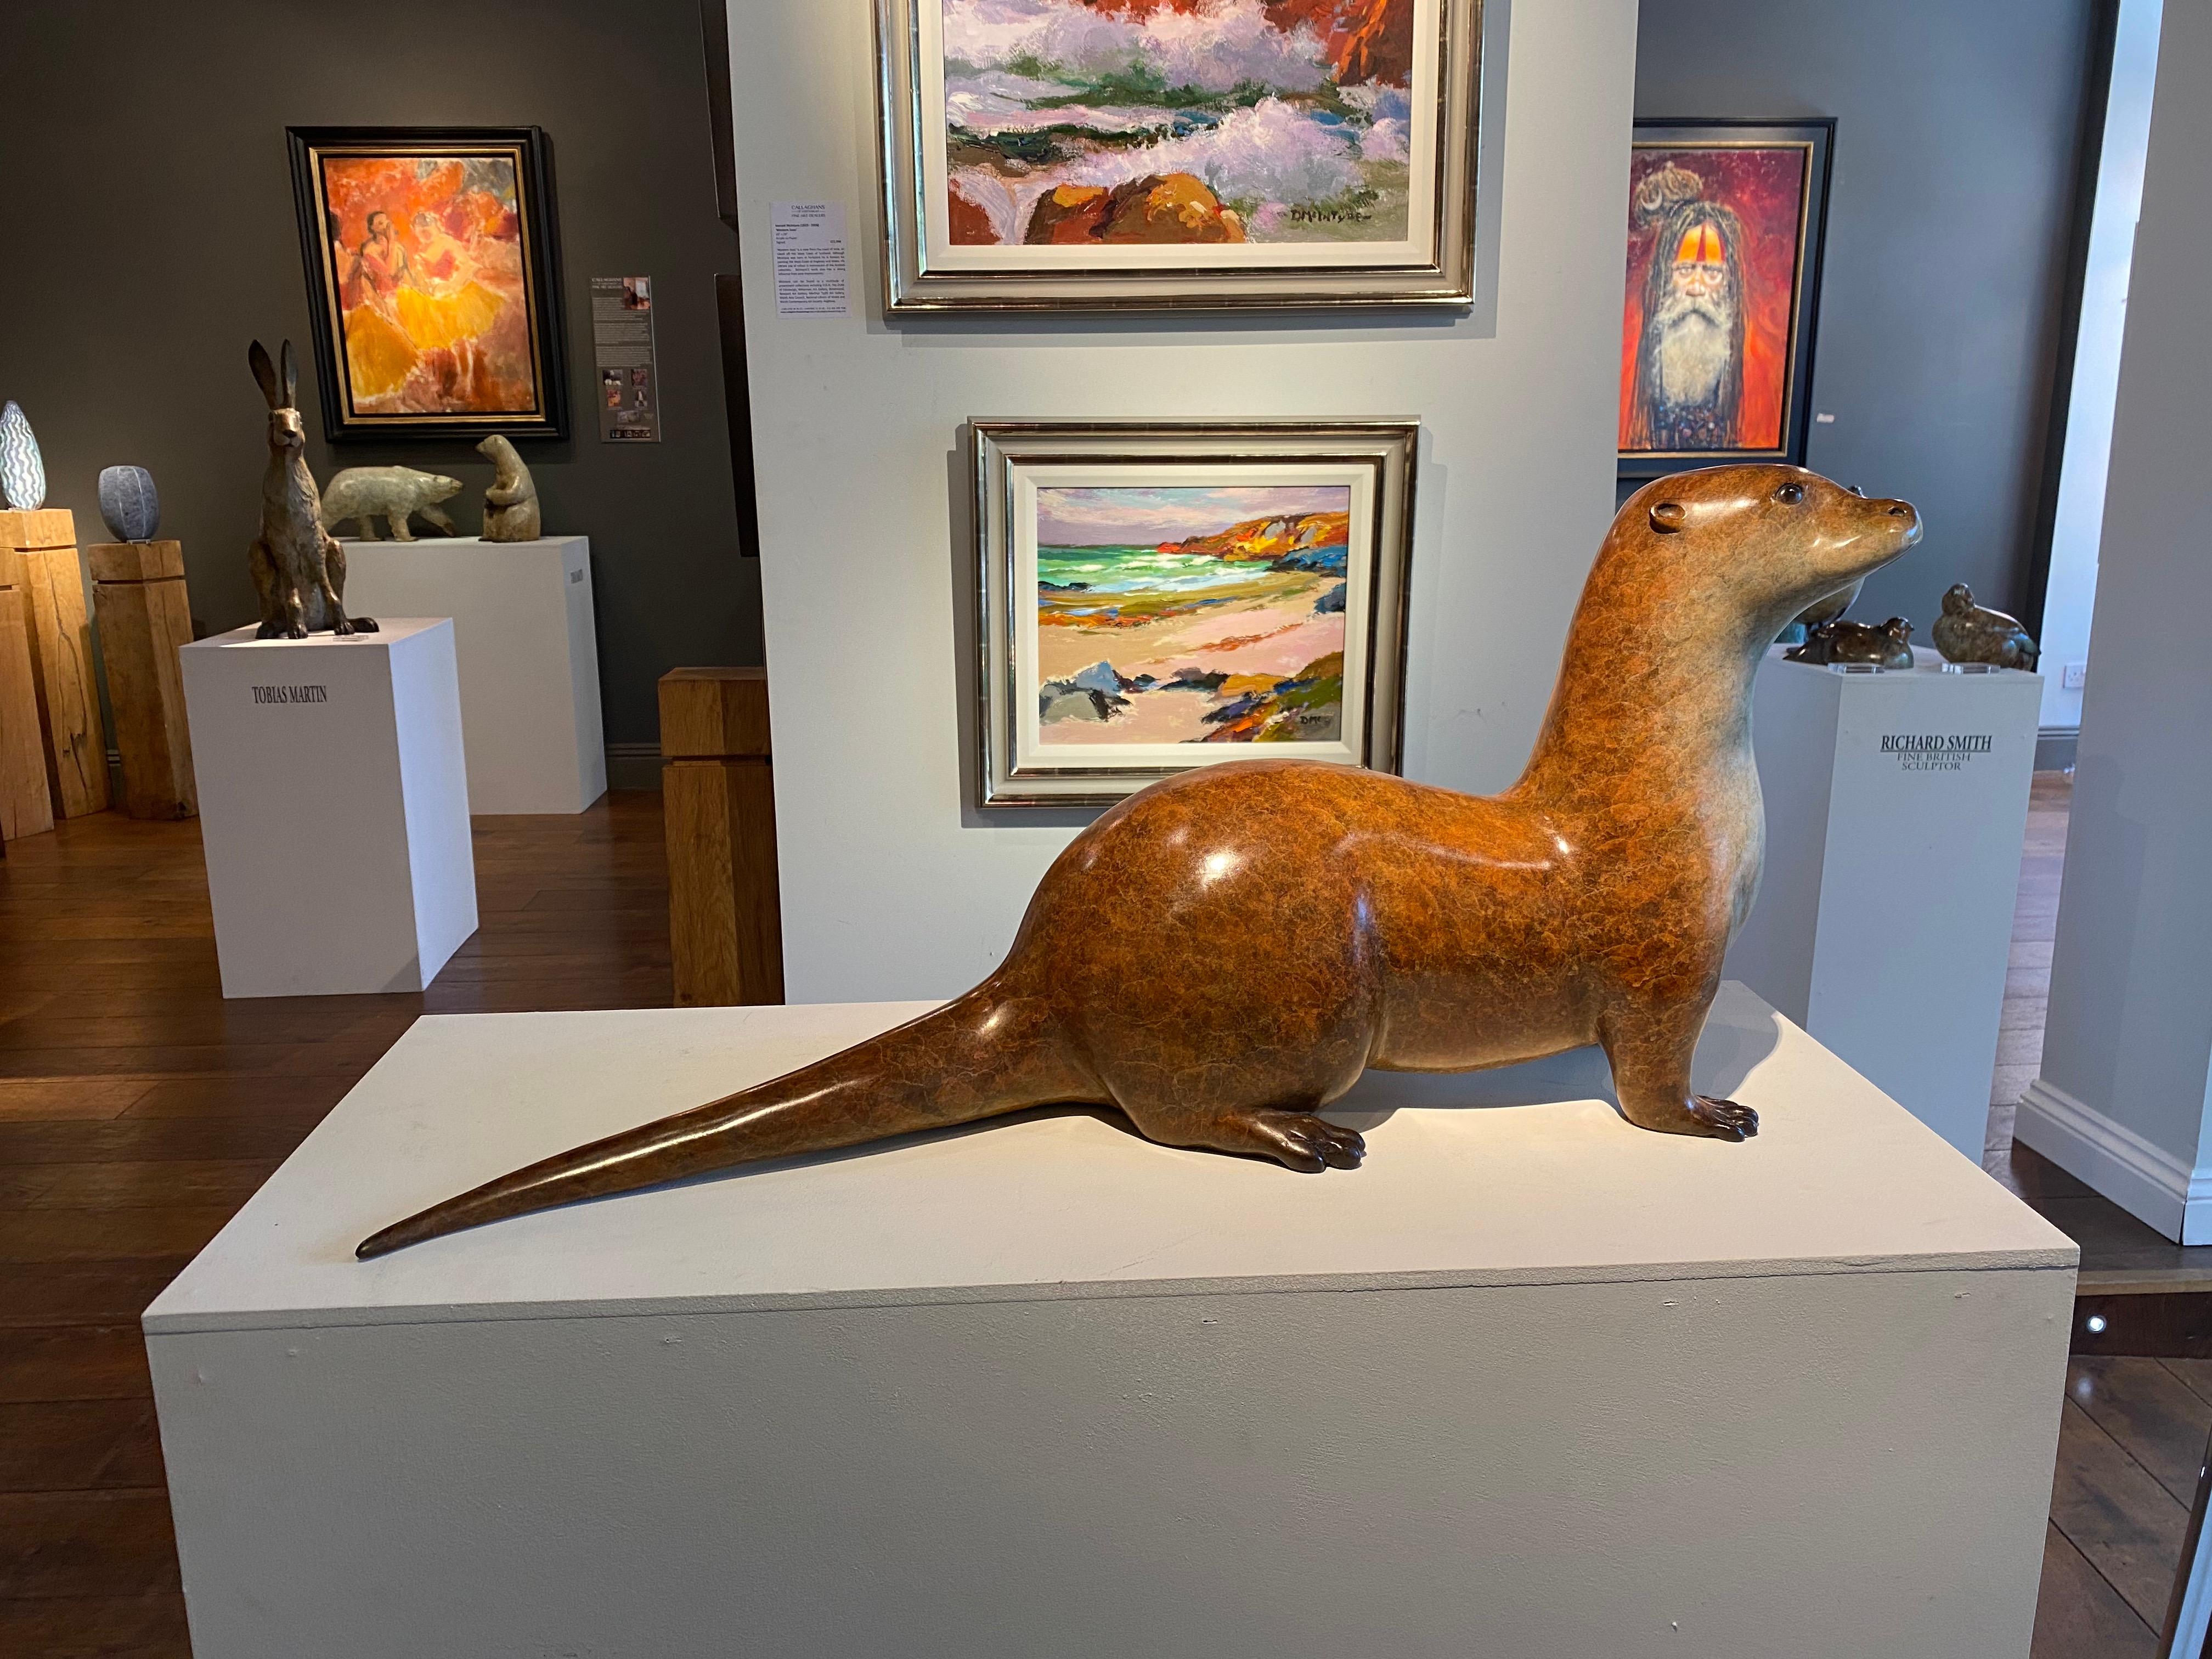 'Pottering Otter'  is a solid Bronze sculpture with a stunning life like qualities. Being a life-size piece Smith has captured every last detail and given this wonderful sculpture life.


Richard Smith's ability to convey so much character with such